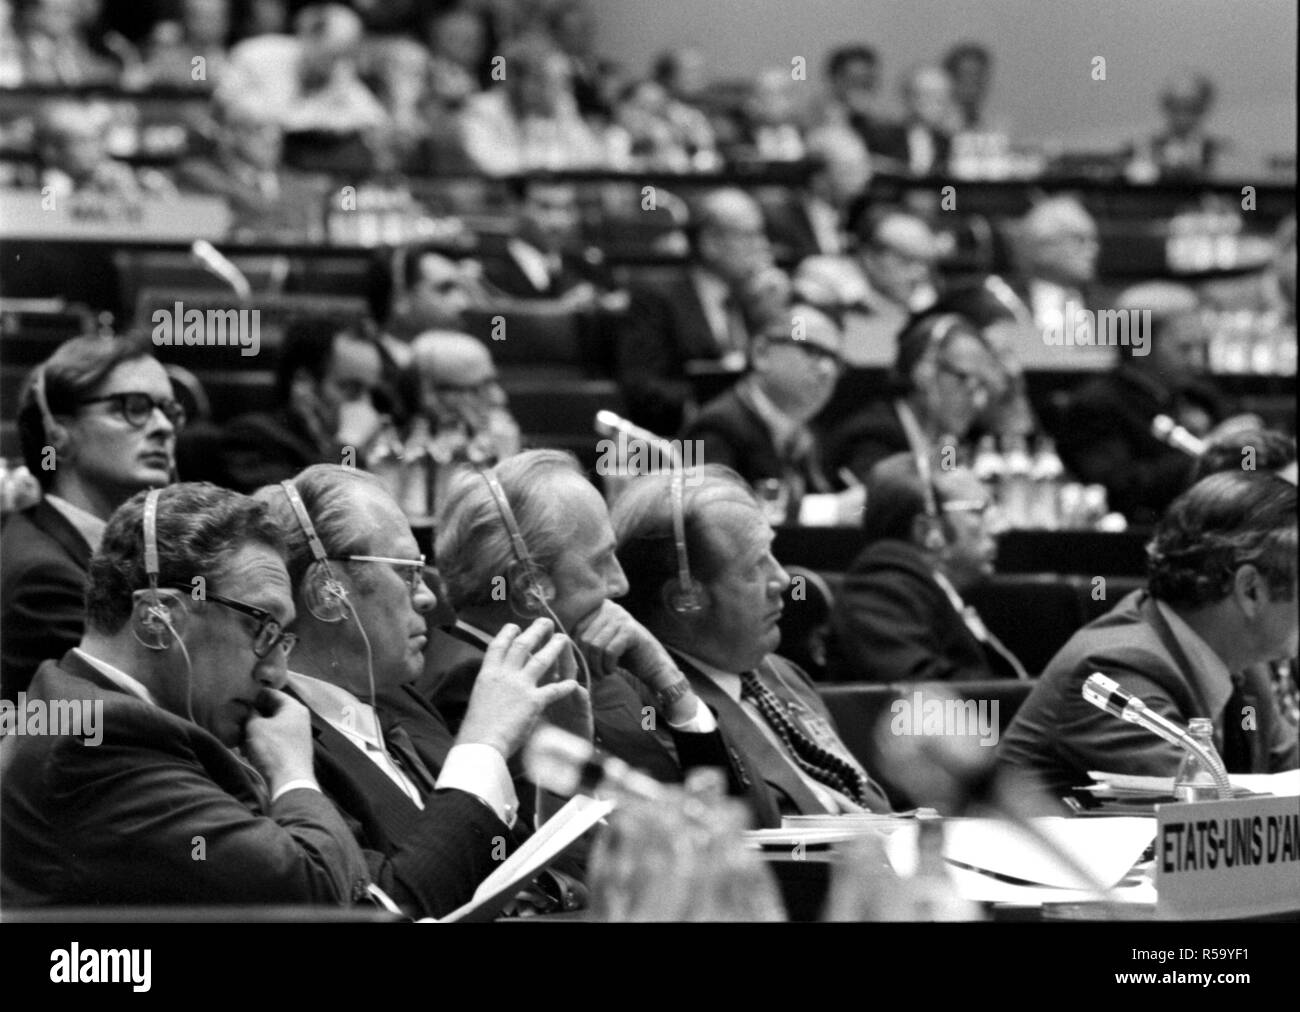 August 1975 - President Gerald R. Ford, Henry Kissinger, and the U.S. Delegation Listening to Discussions in Finlandia Hall during the Conference on Security and Cooperation in Europe (CSCE), in Helsinki, Finland Stock Photo